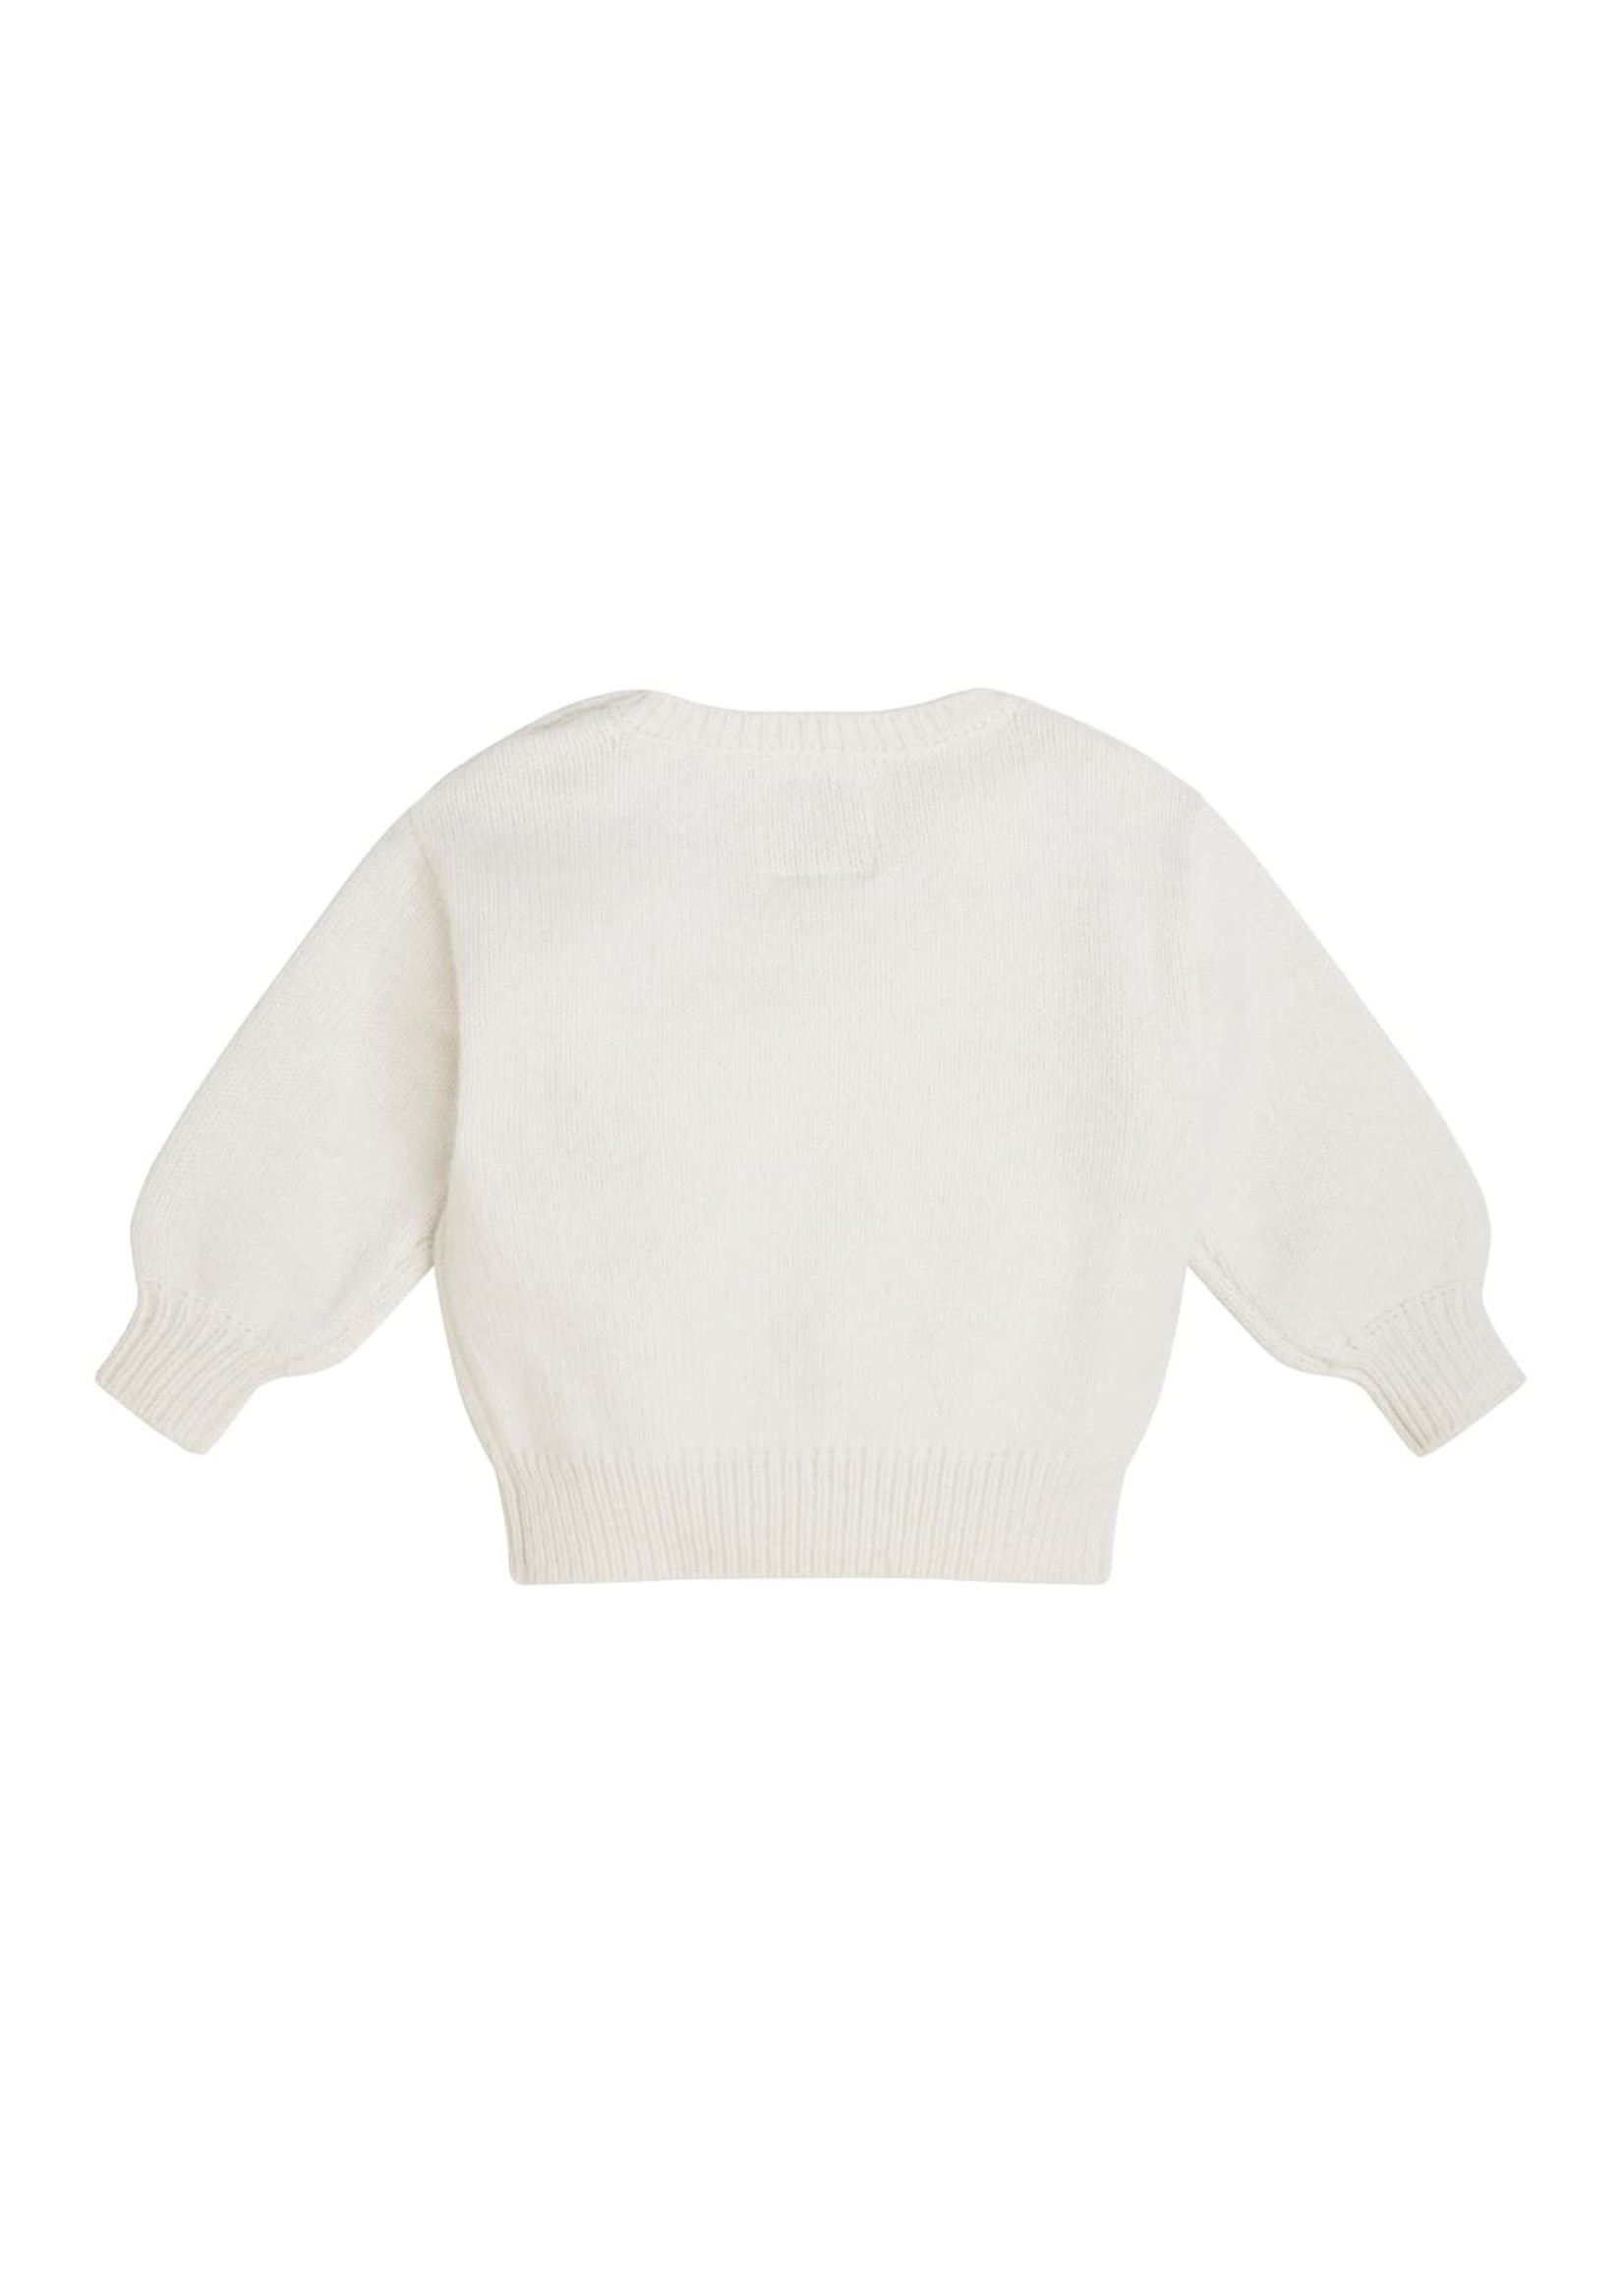 GUESS GUESS Sweater "My Heart Is Yours" salt white